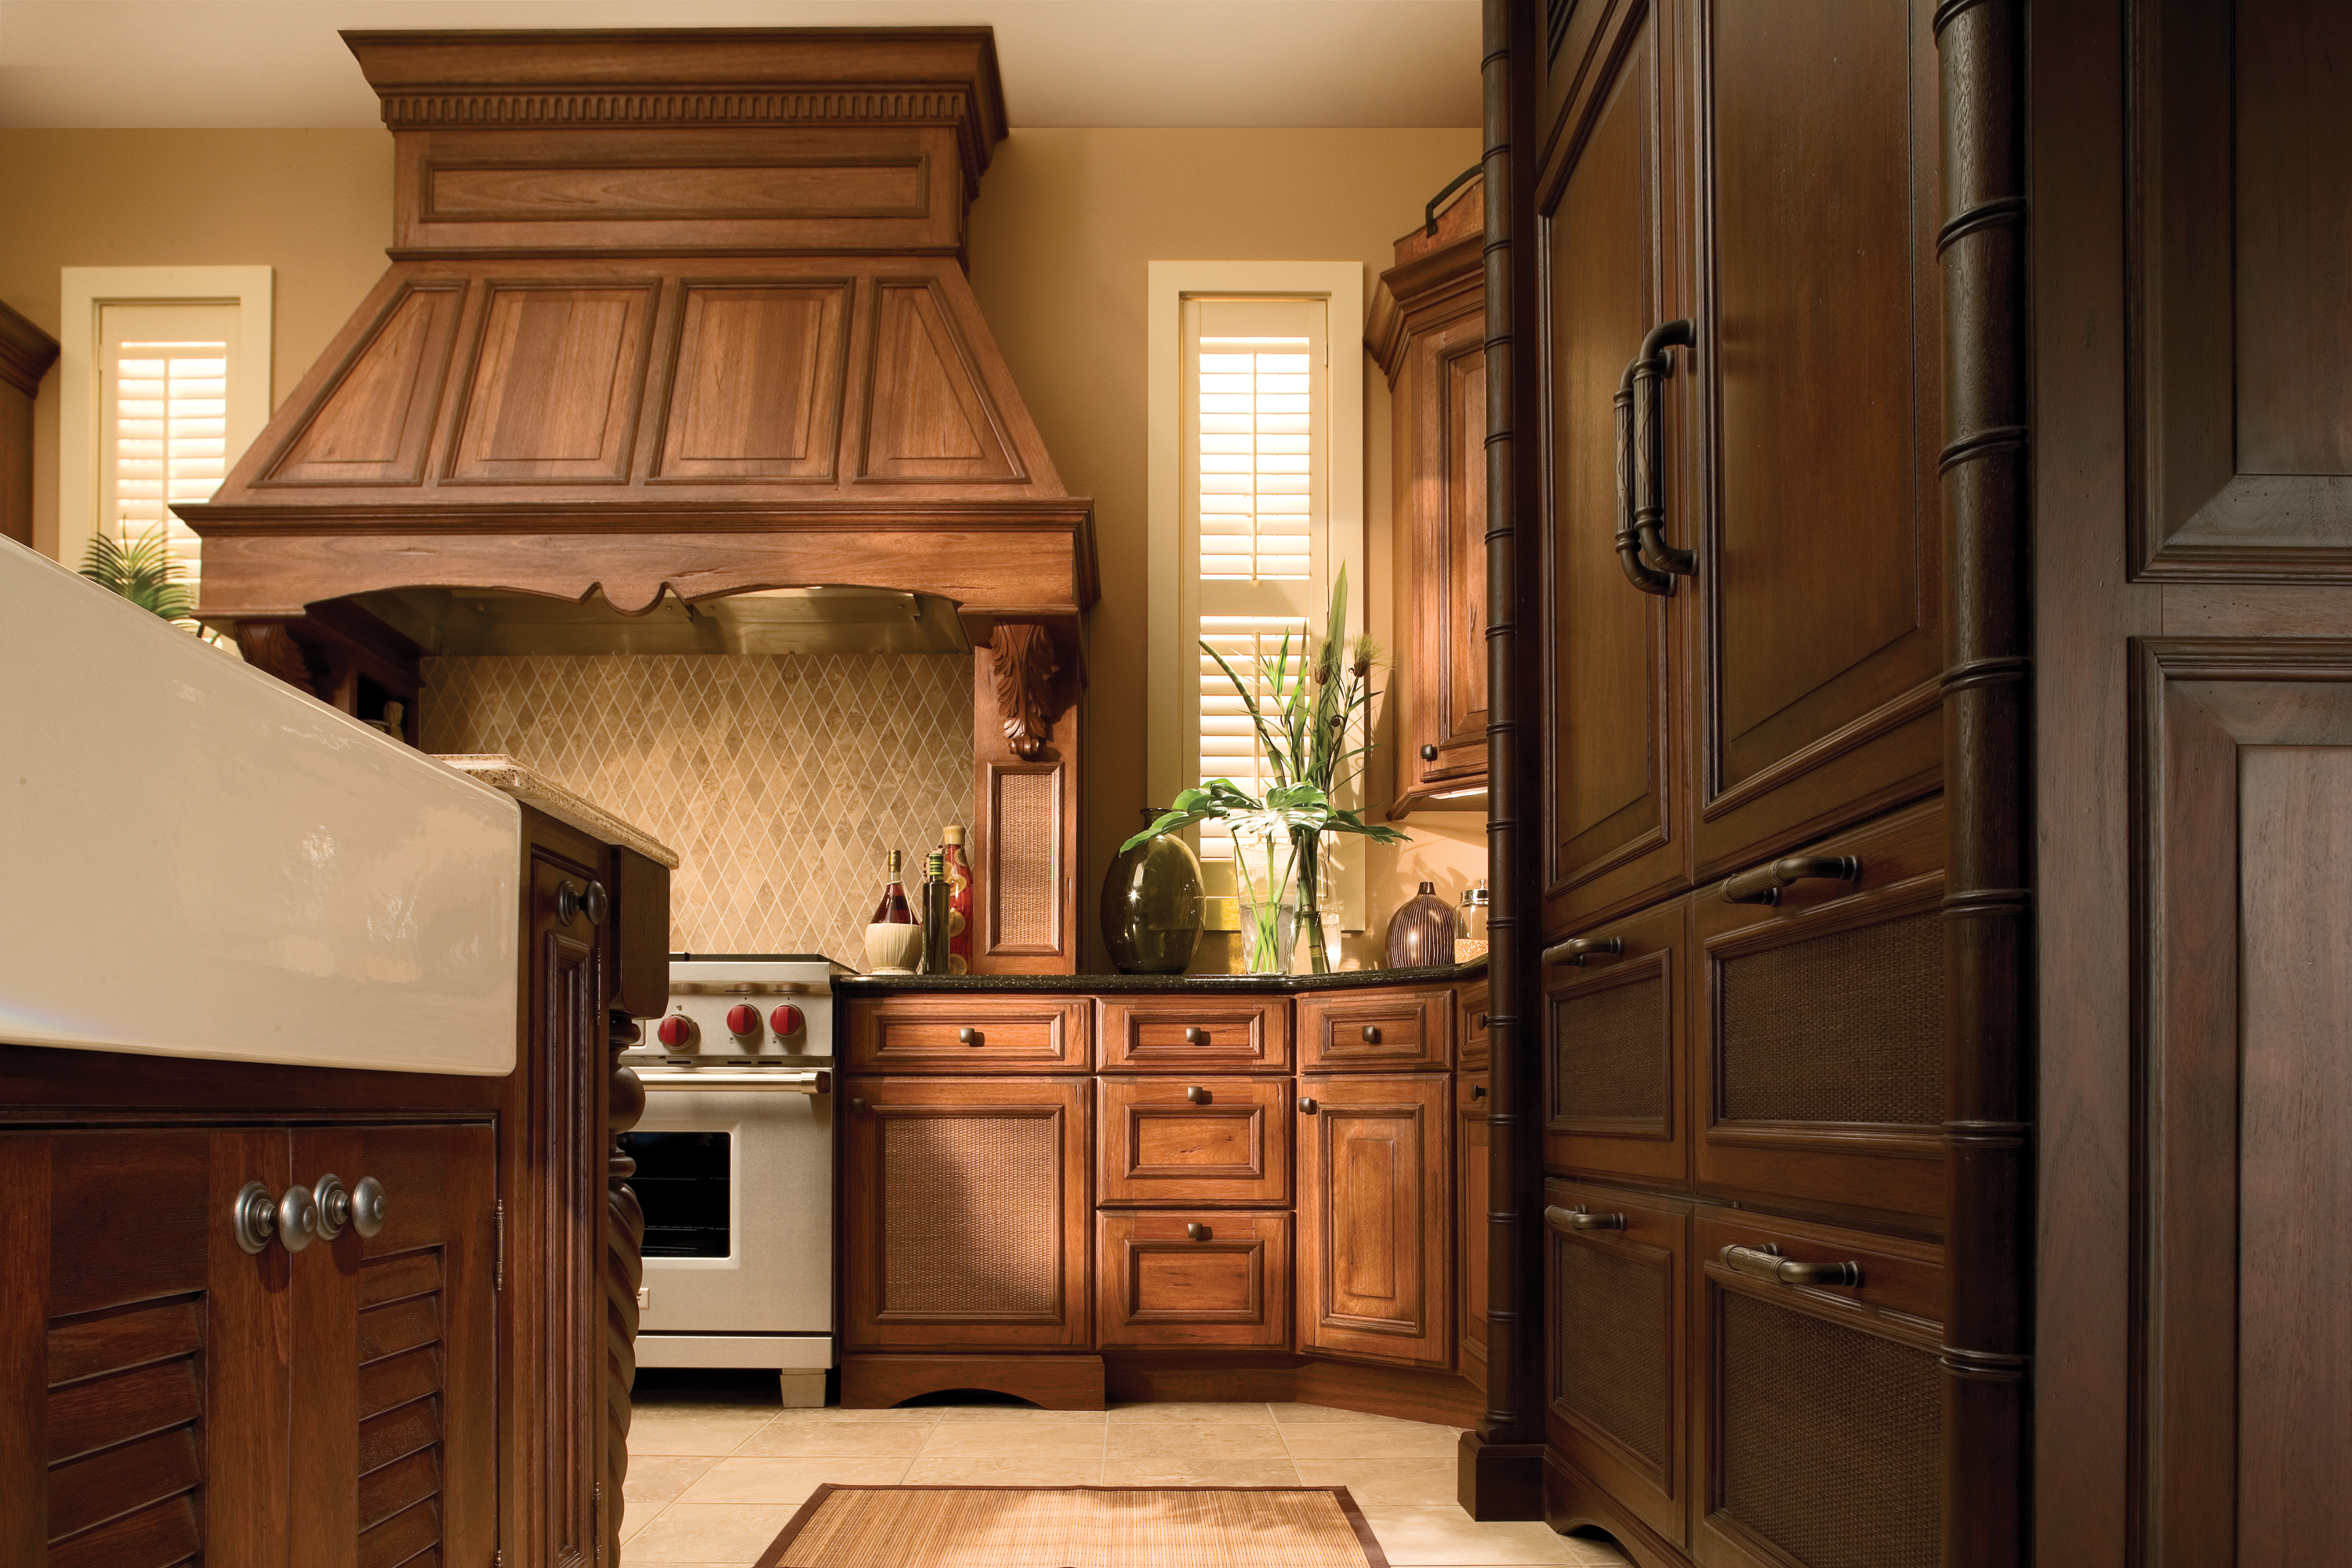 Cardinal Kitchens & Baths  Storage Solutions 101: Pots and Pans